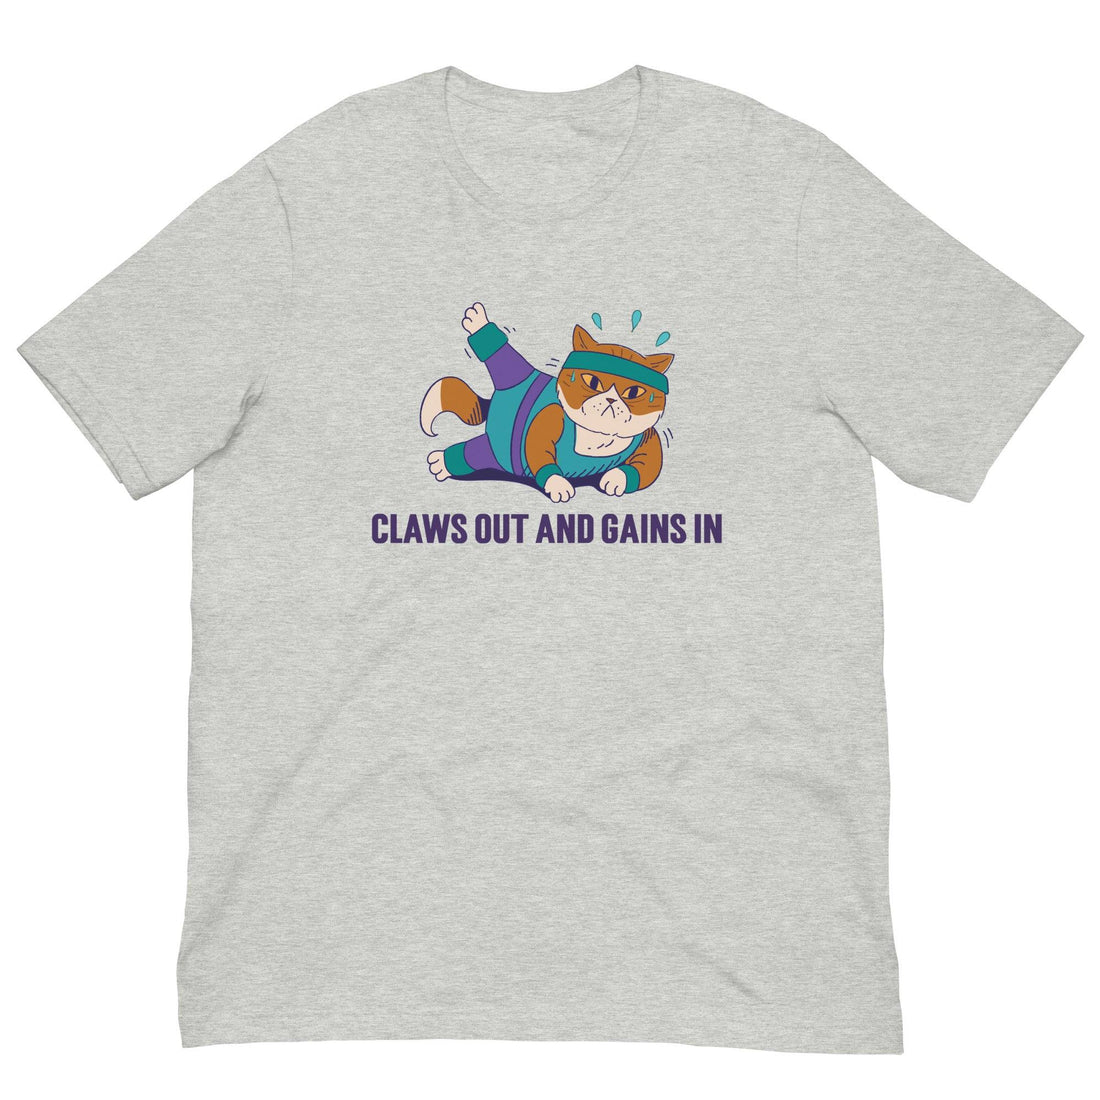 Claws Out and Gains In Cat Shirt - Cat Shirts USA